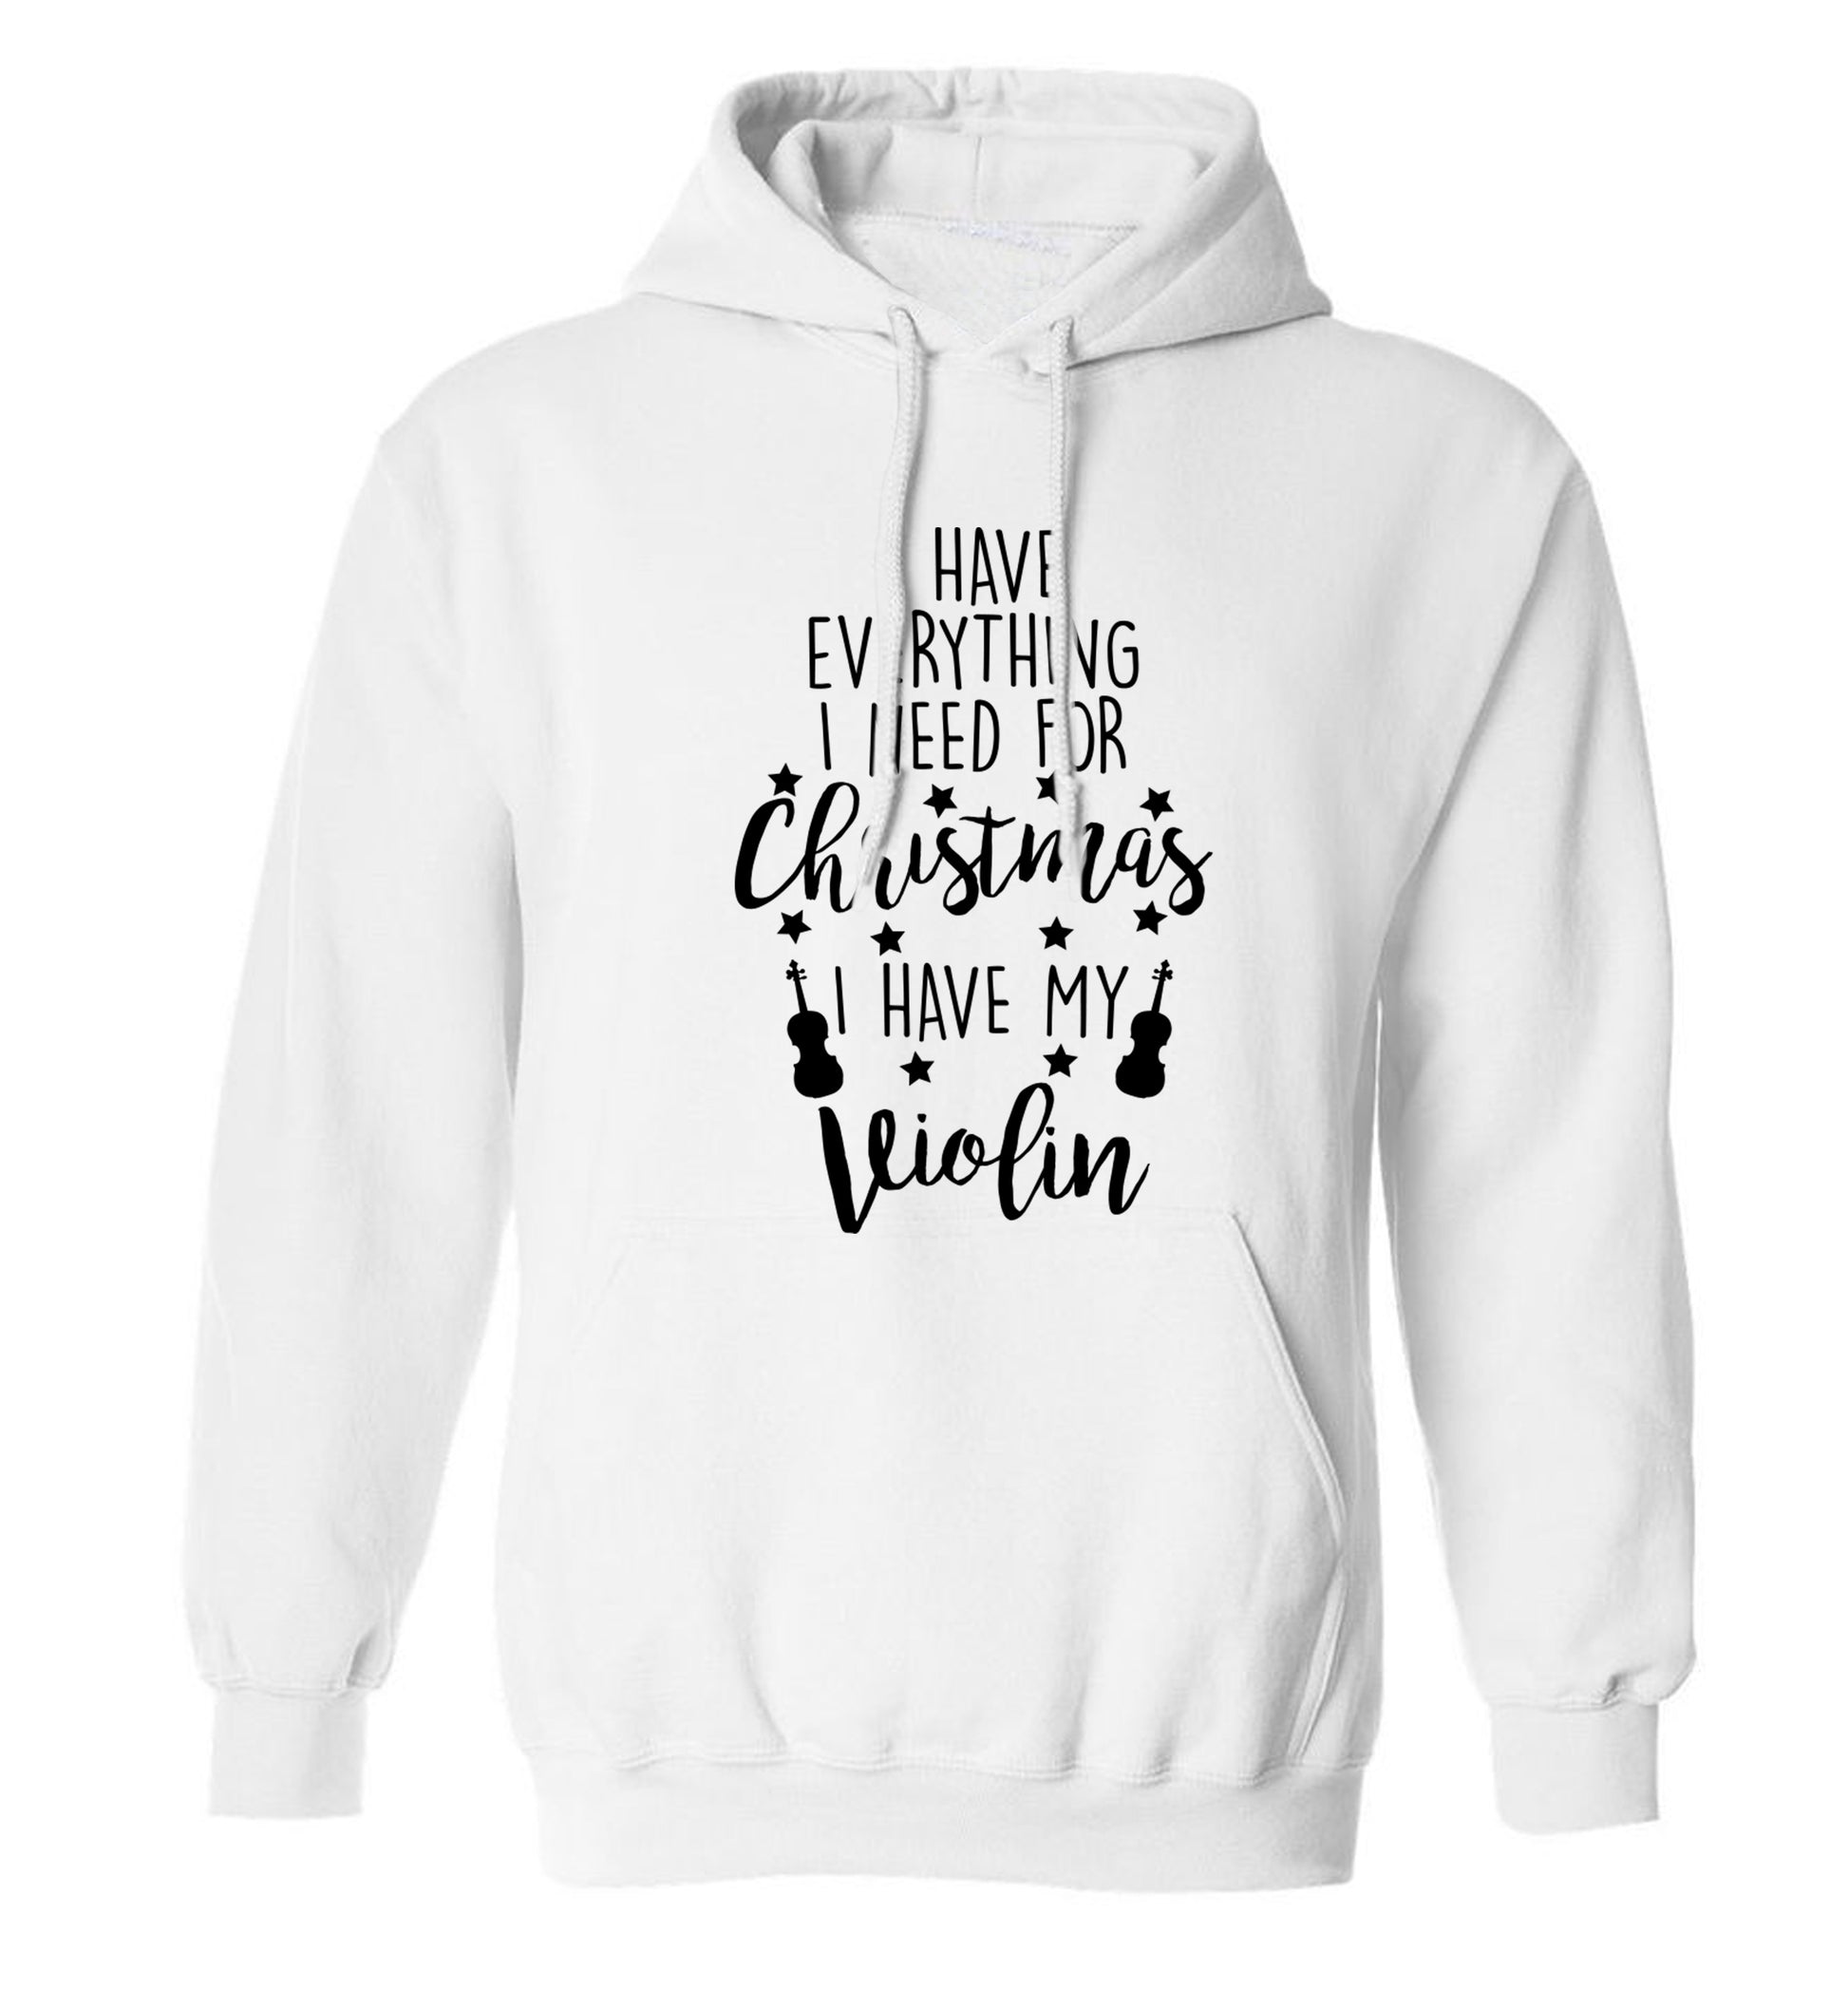 I have everything I need for Christmas I have my violin adults unisex white hoodie 2XL